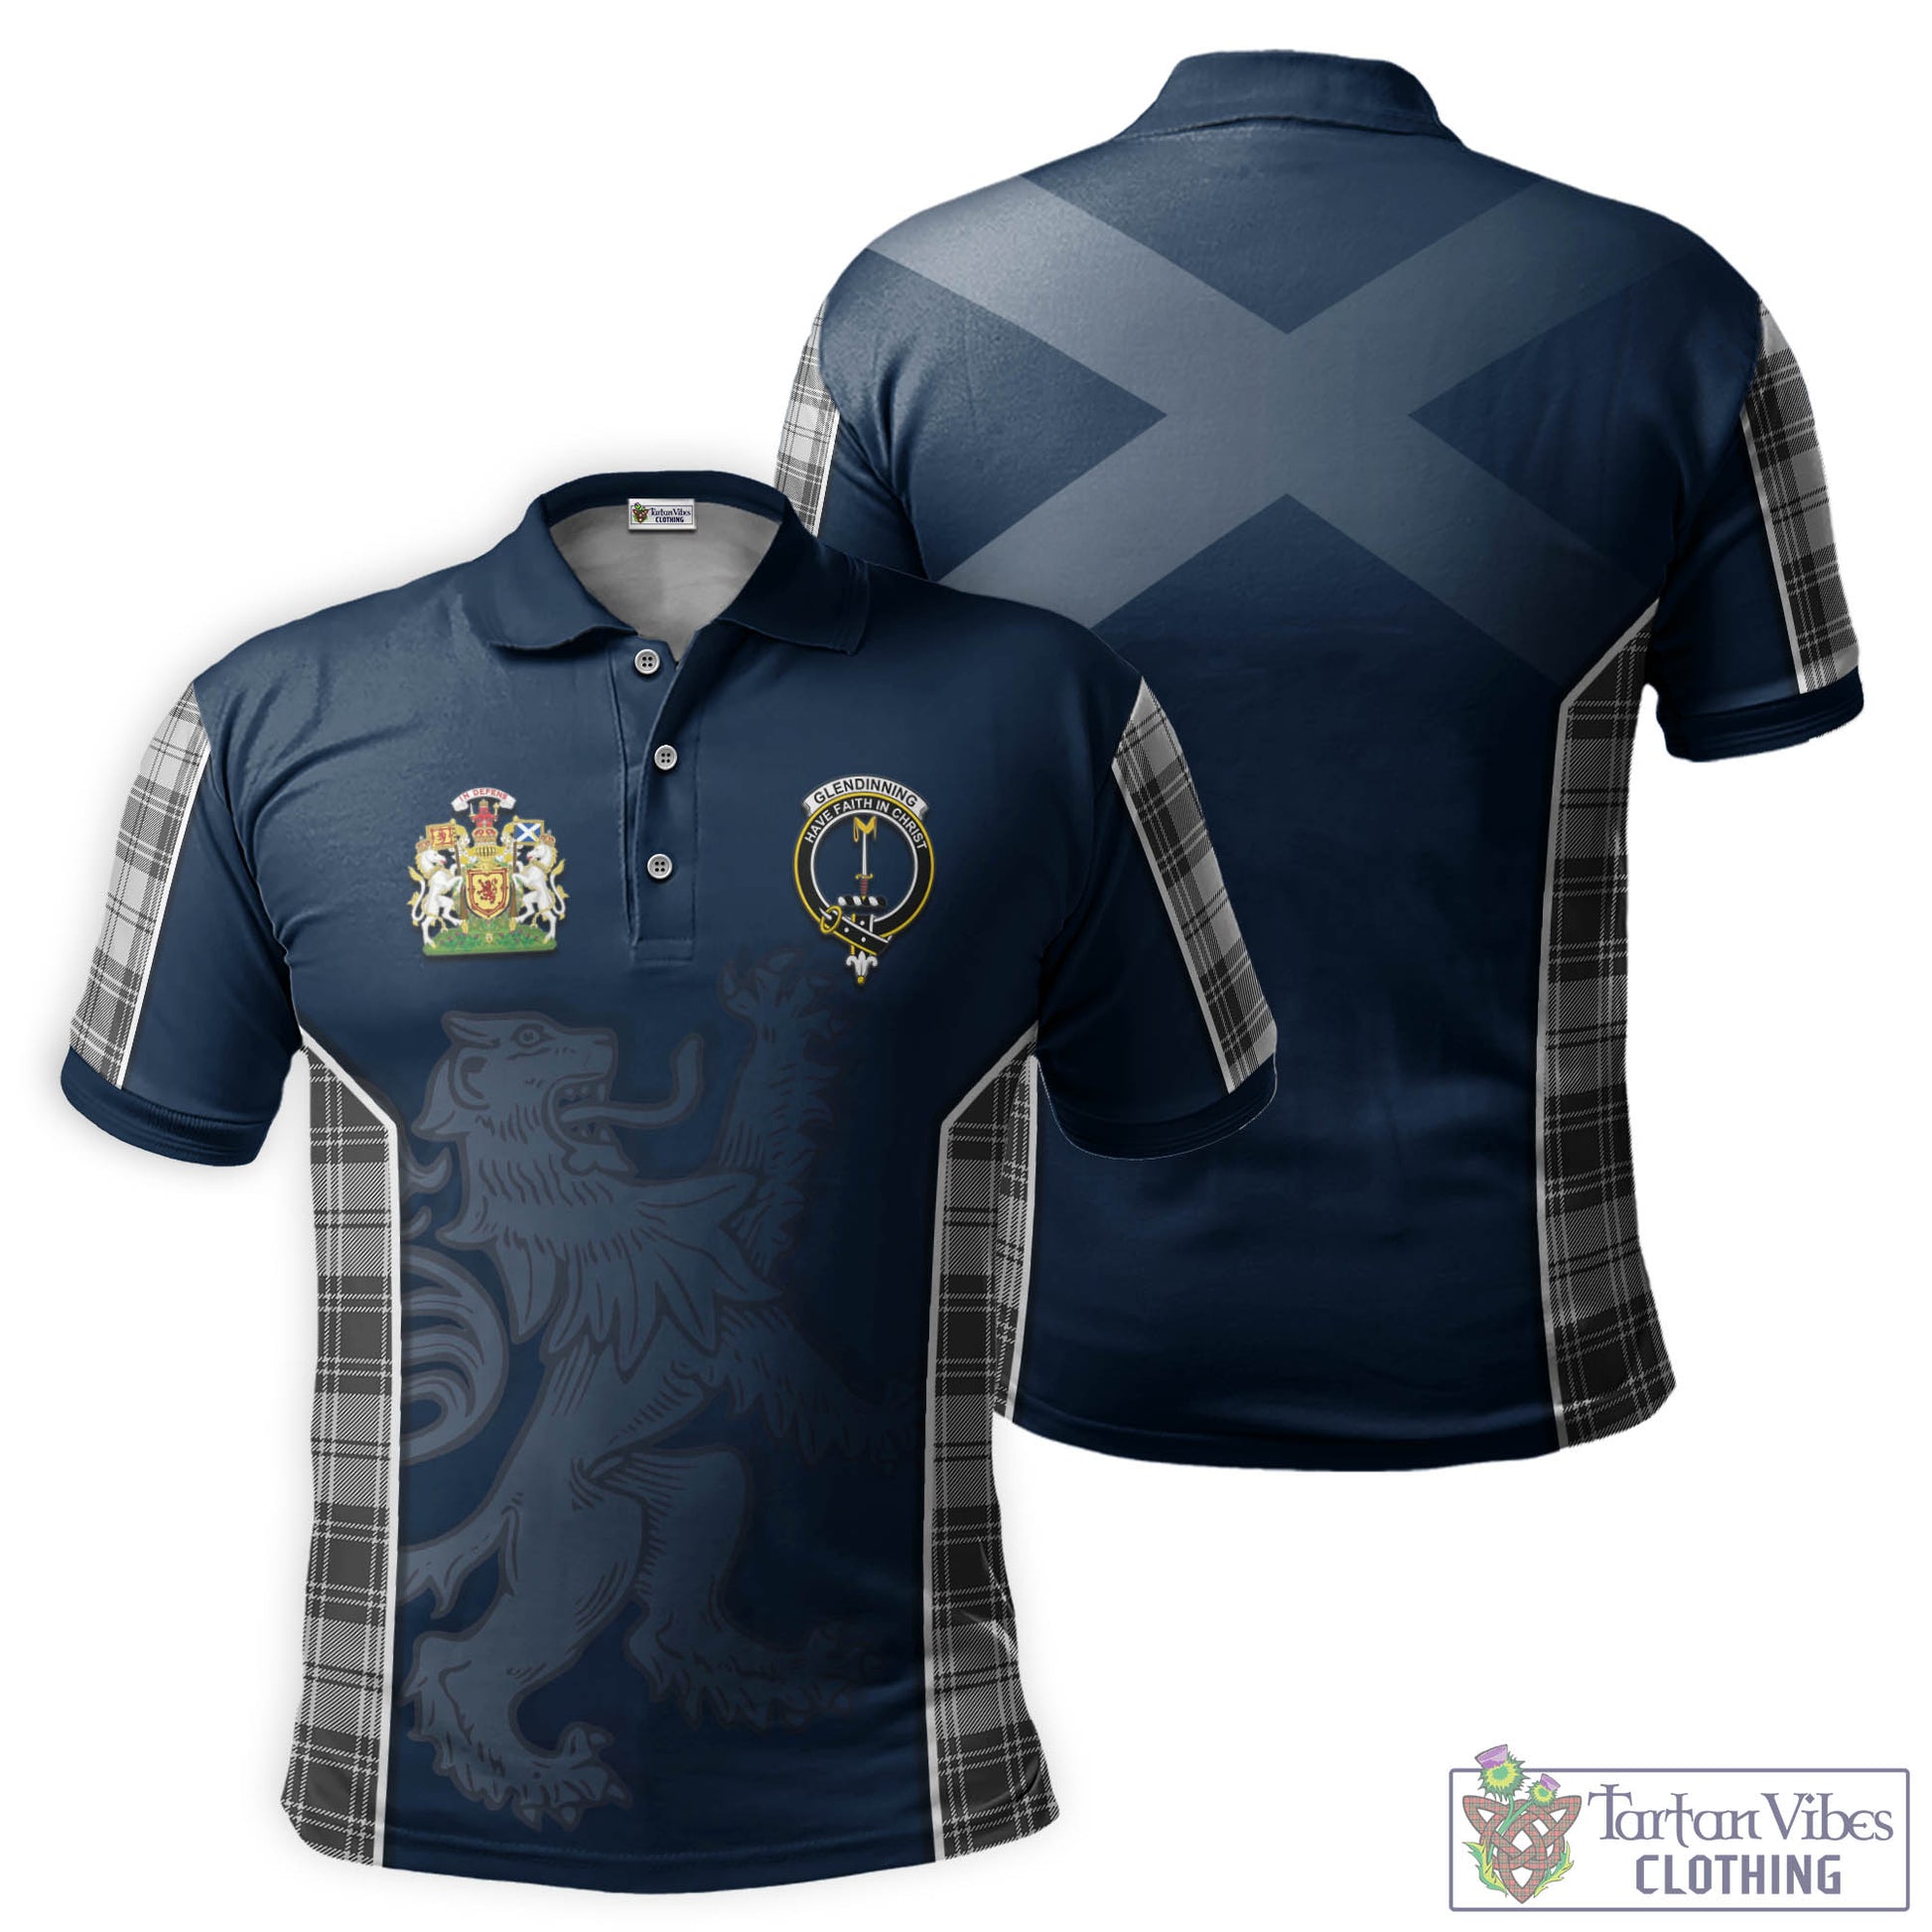 Tartan Vibes Clothing Glendinning Tartan Men's Polo Shirt with Family Crest and Lion Rampant Vibes Sport Style